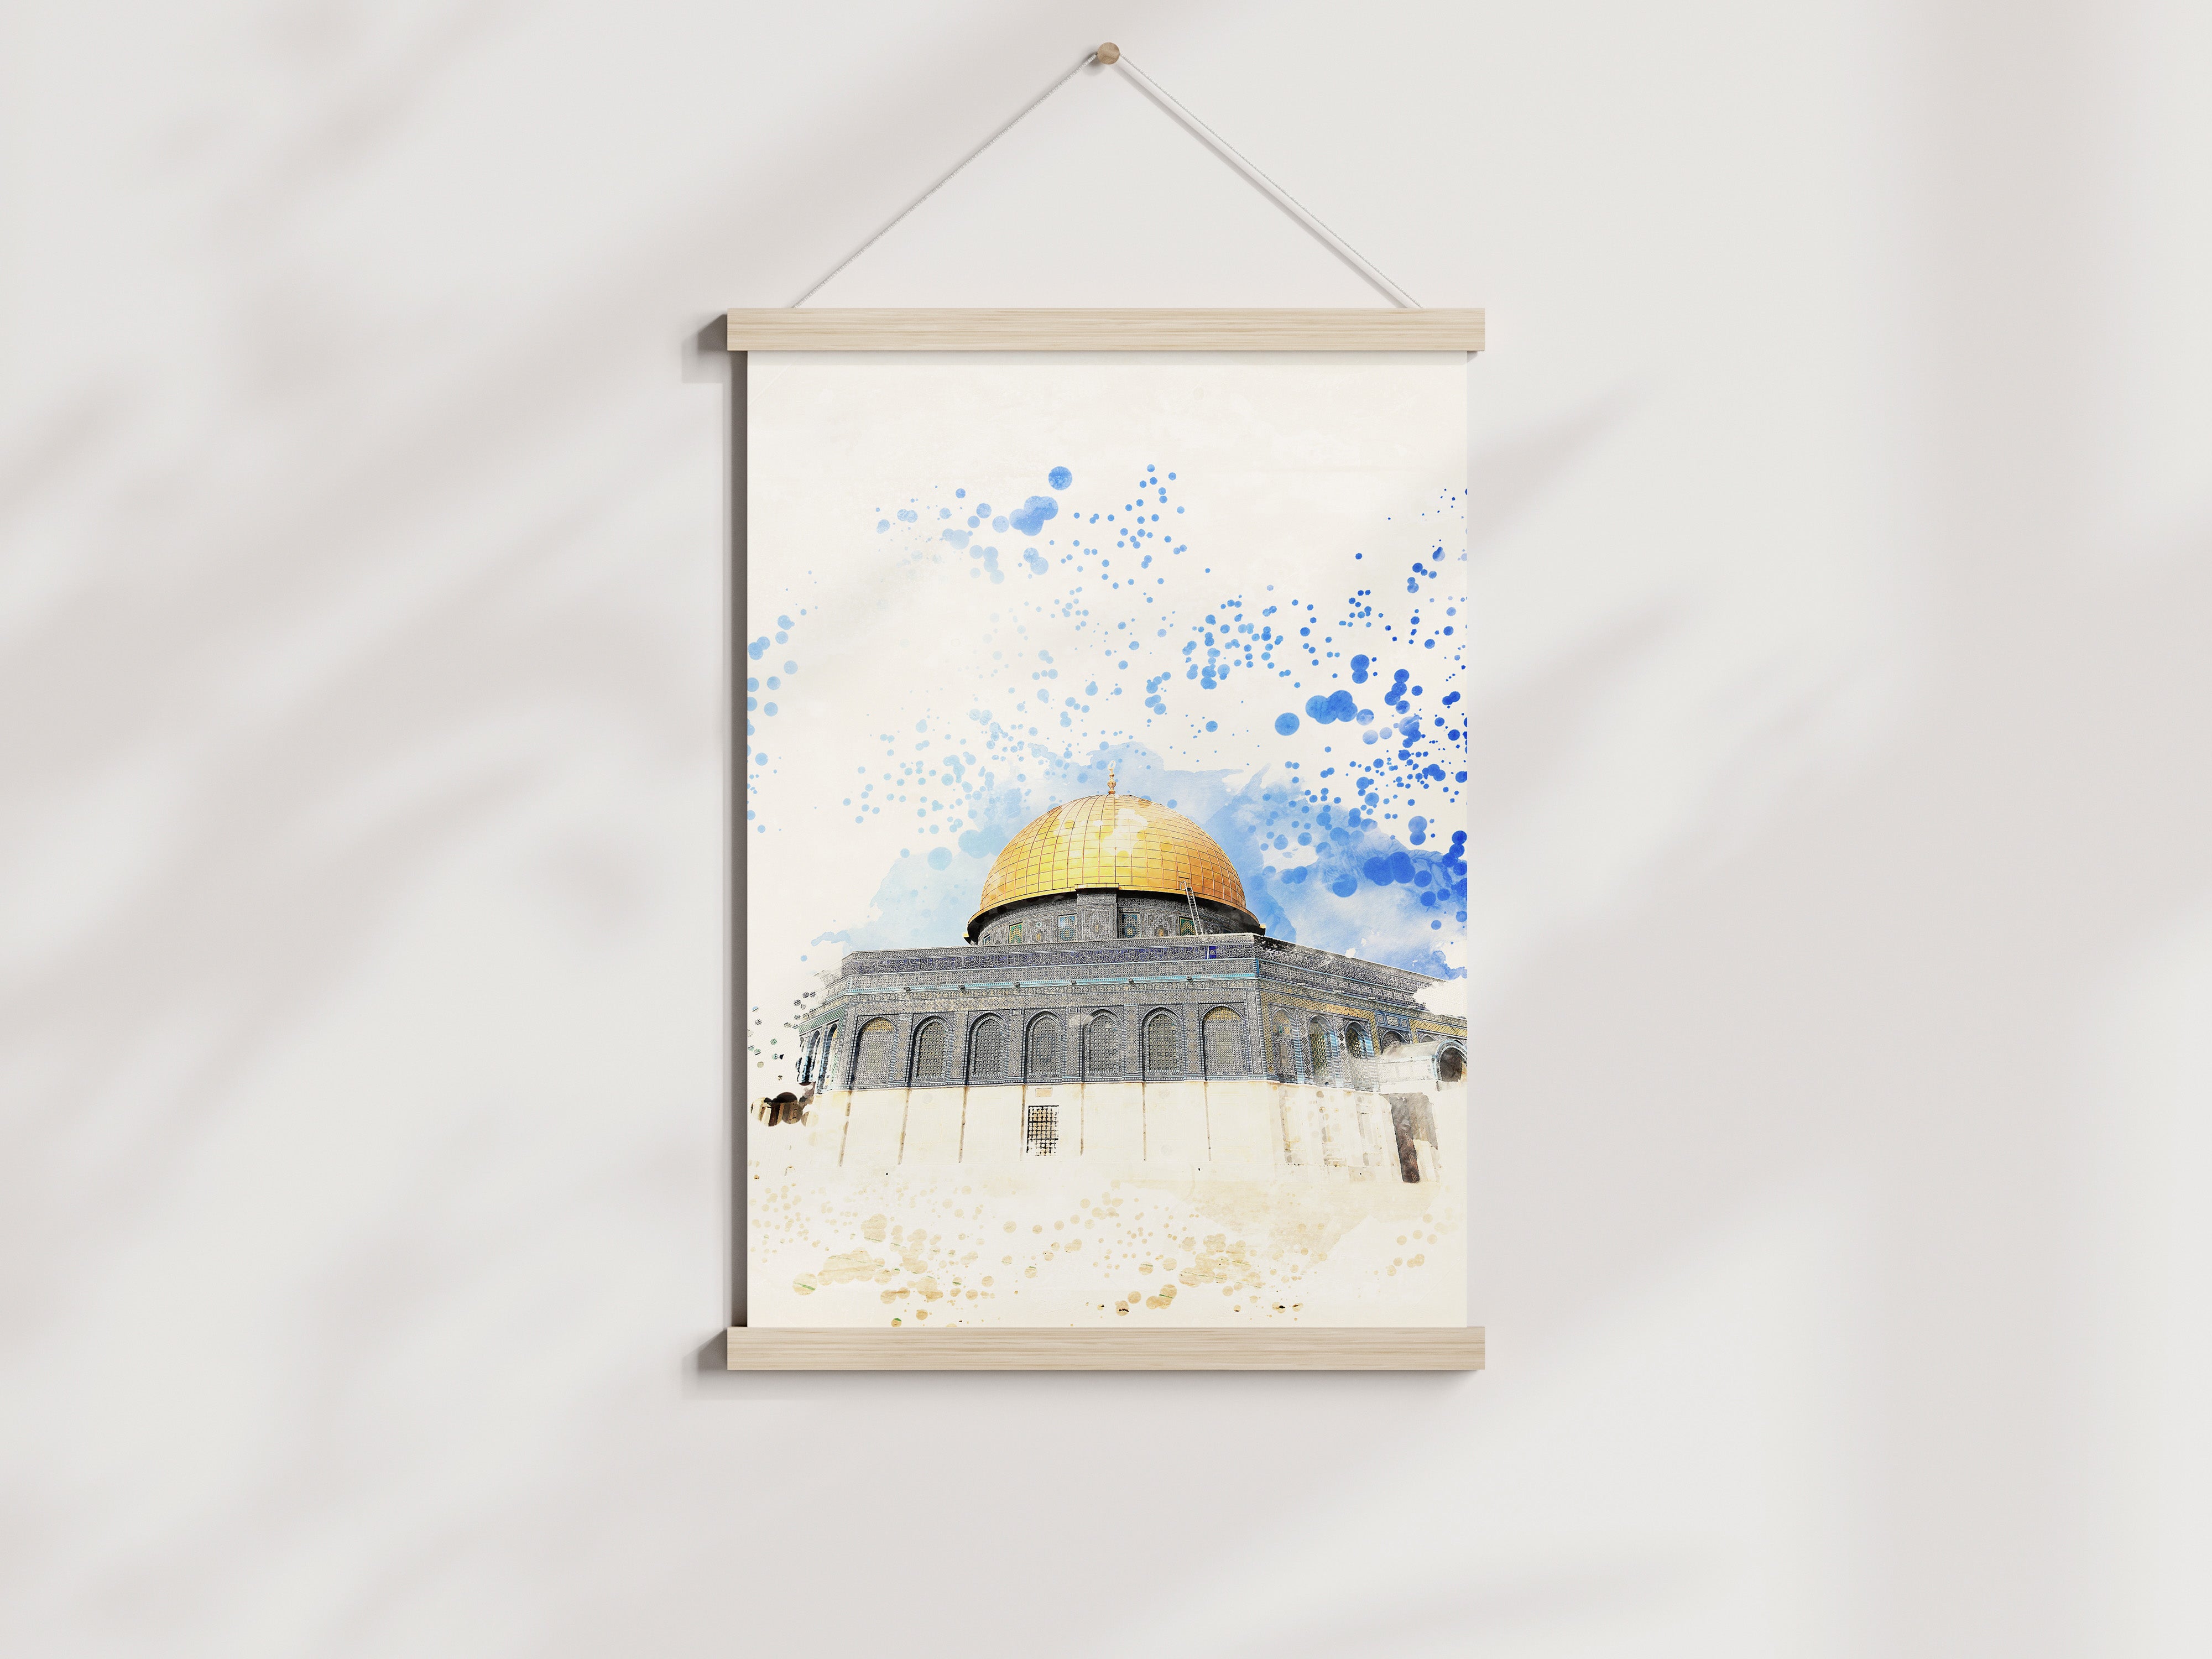 Dome Mosque Painting Effect Islamic Art Poster Hanger - Peaceful Arts UK